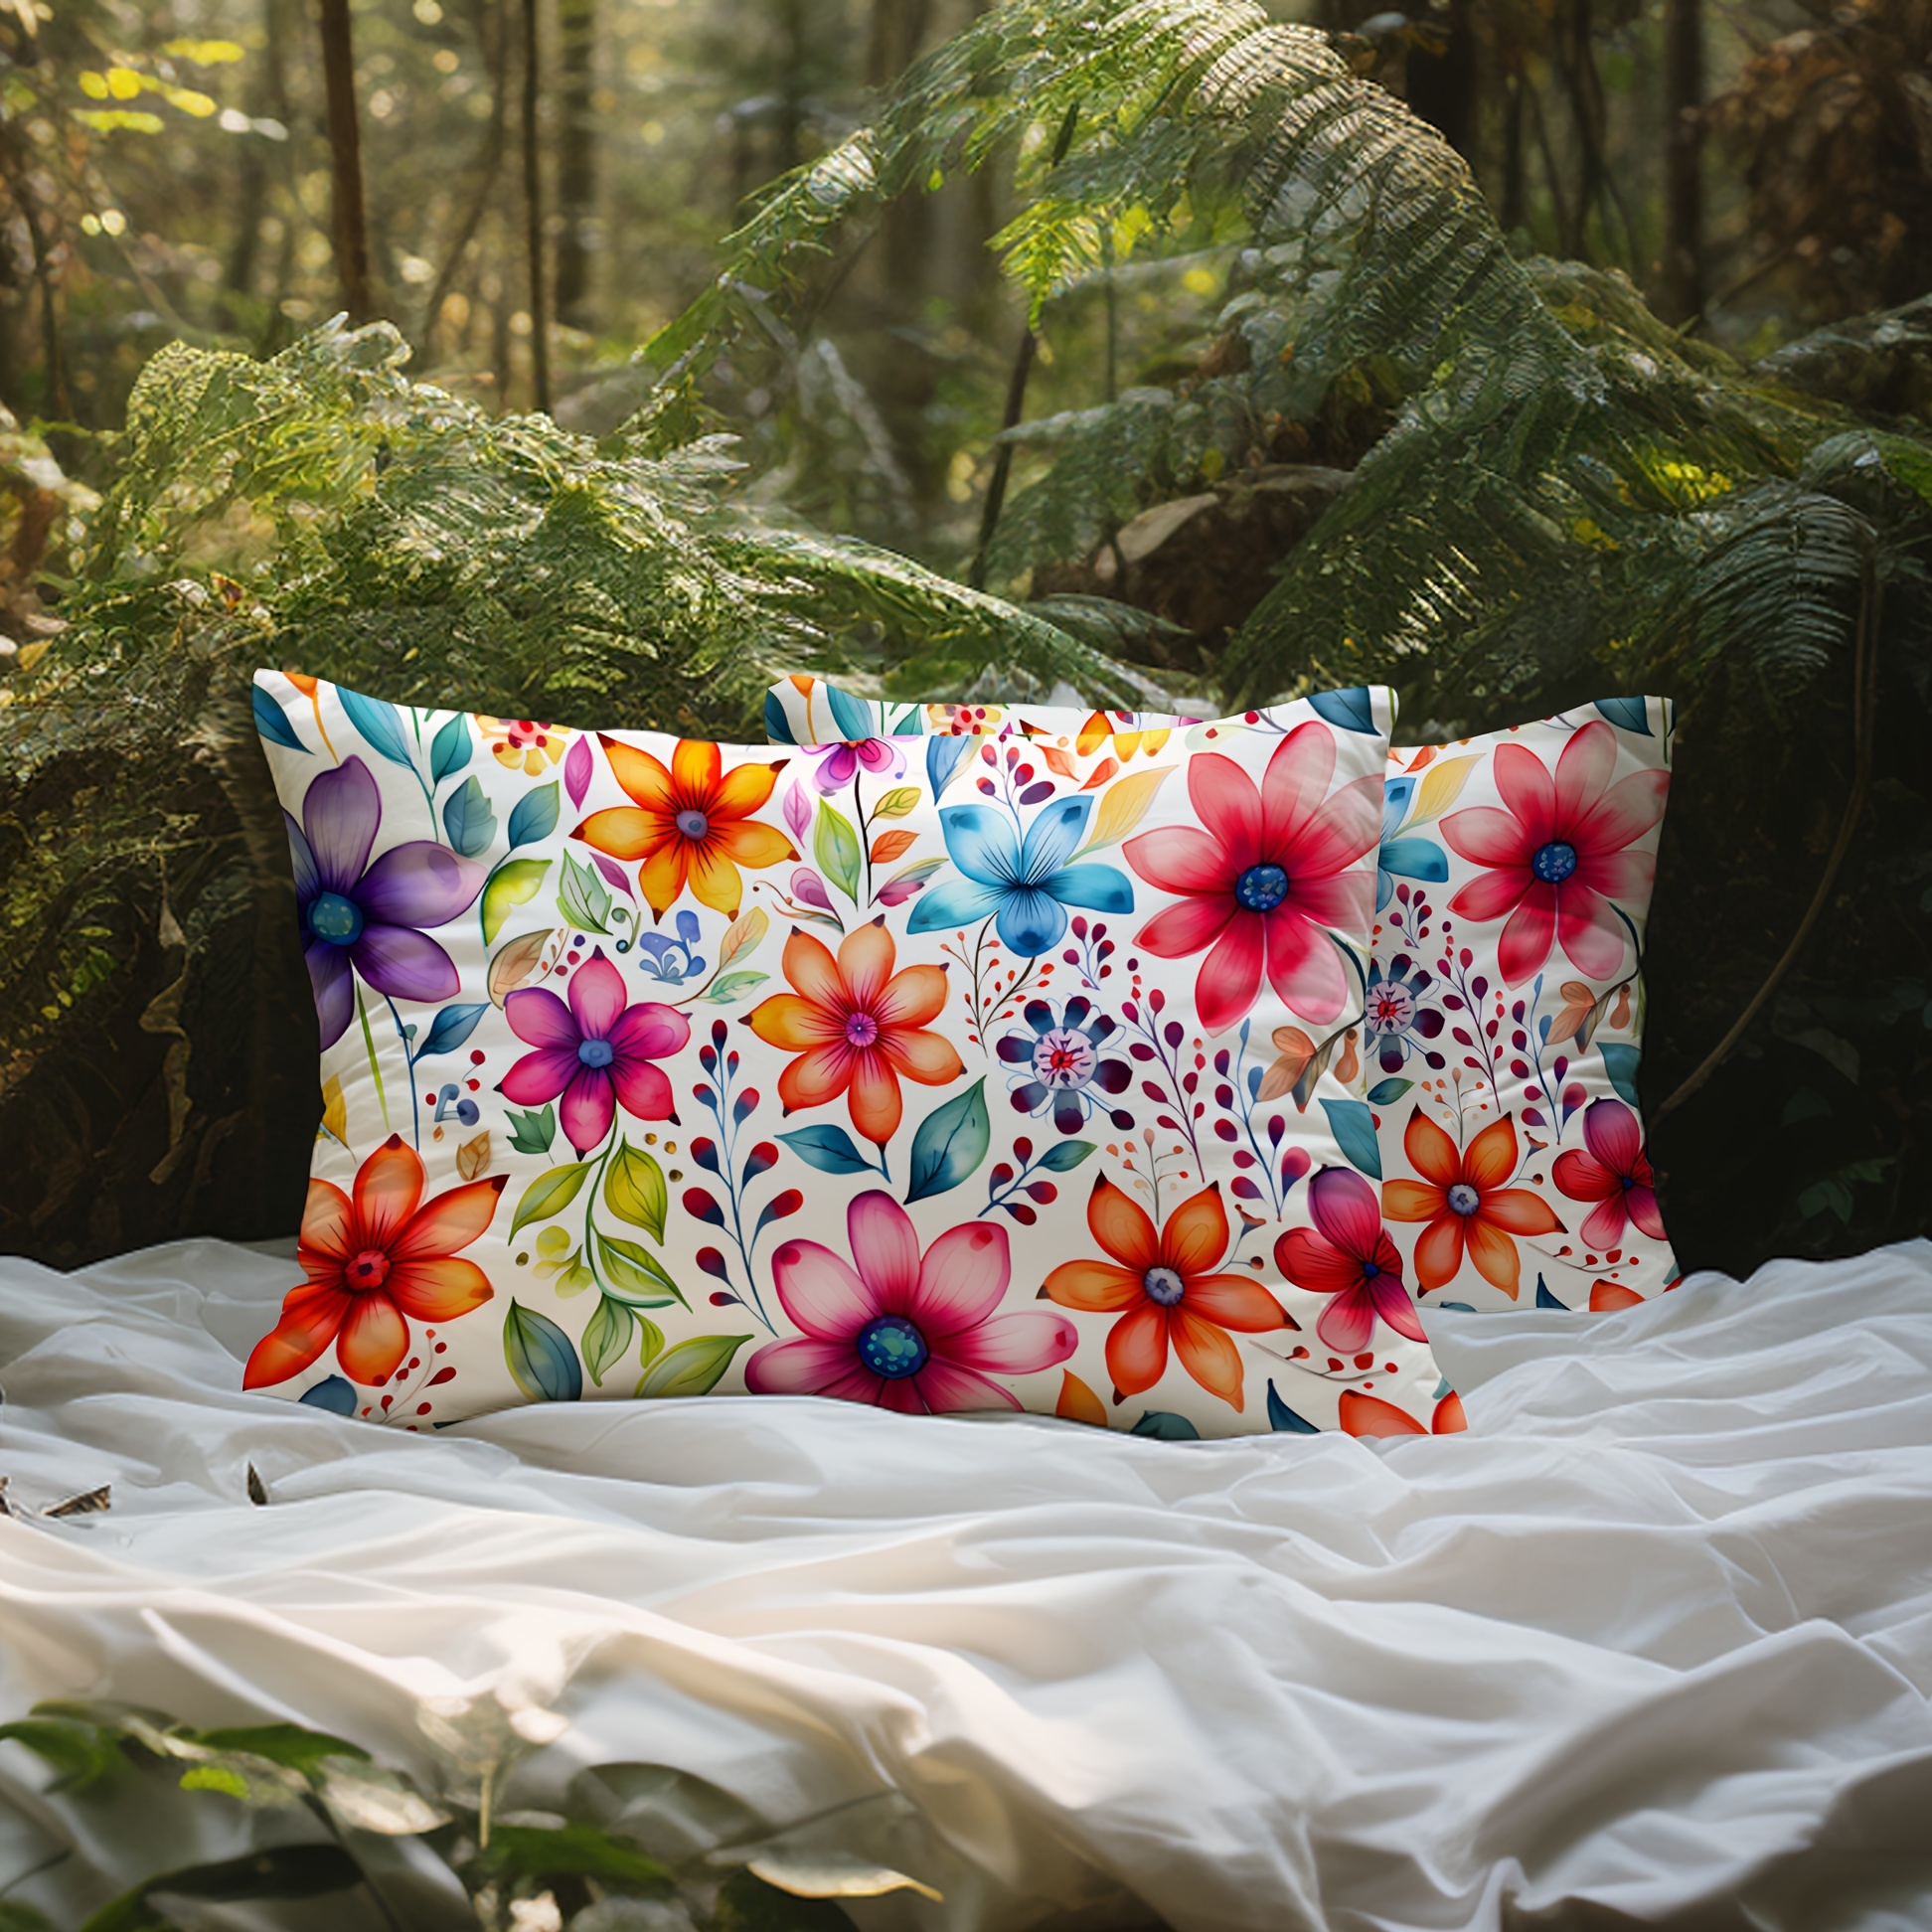 

2-piece Soft & Comfortable Floral 3d Print Pillowcases - Envelope Closure, Machine Washable, Perfect For Bedroom & Guest Room